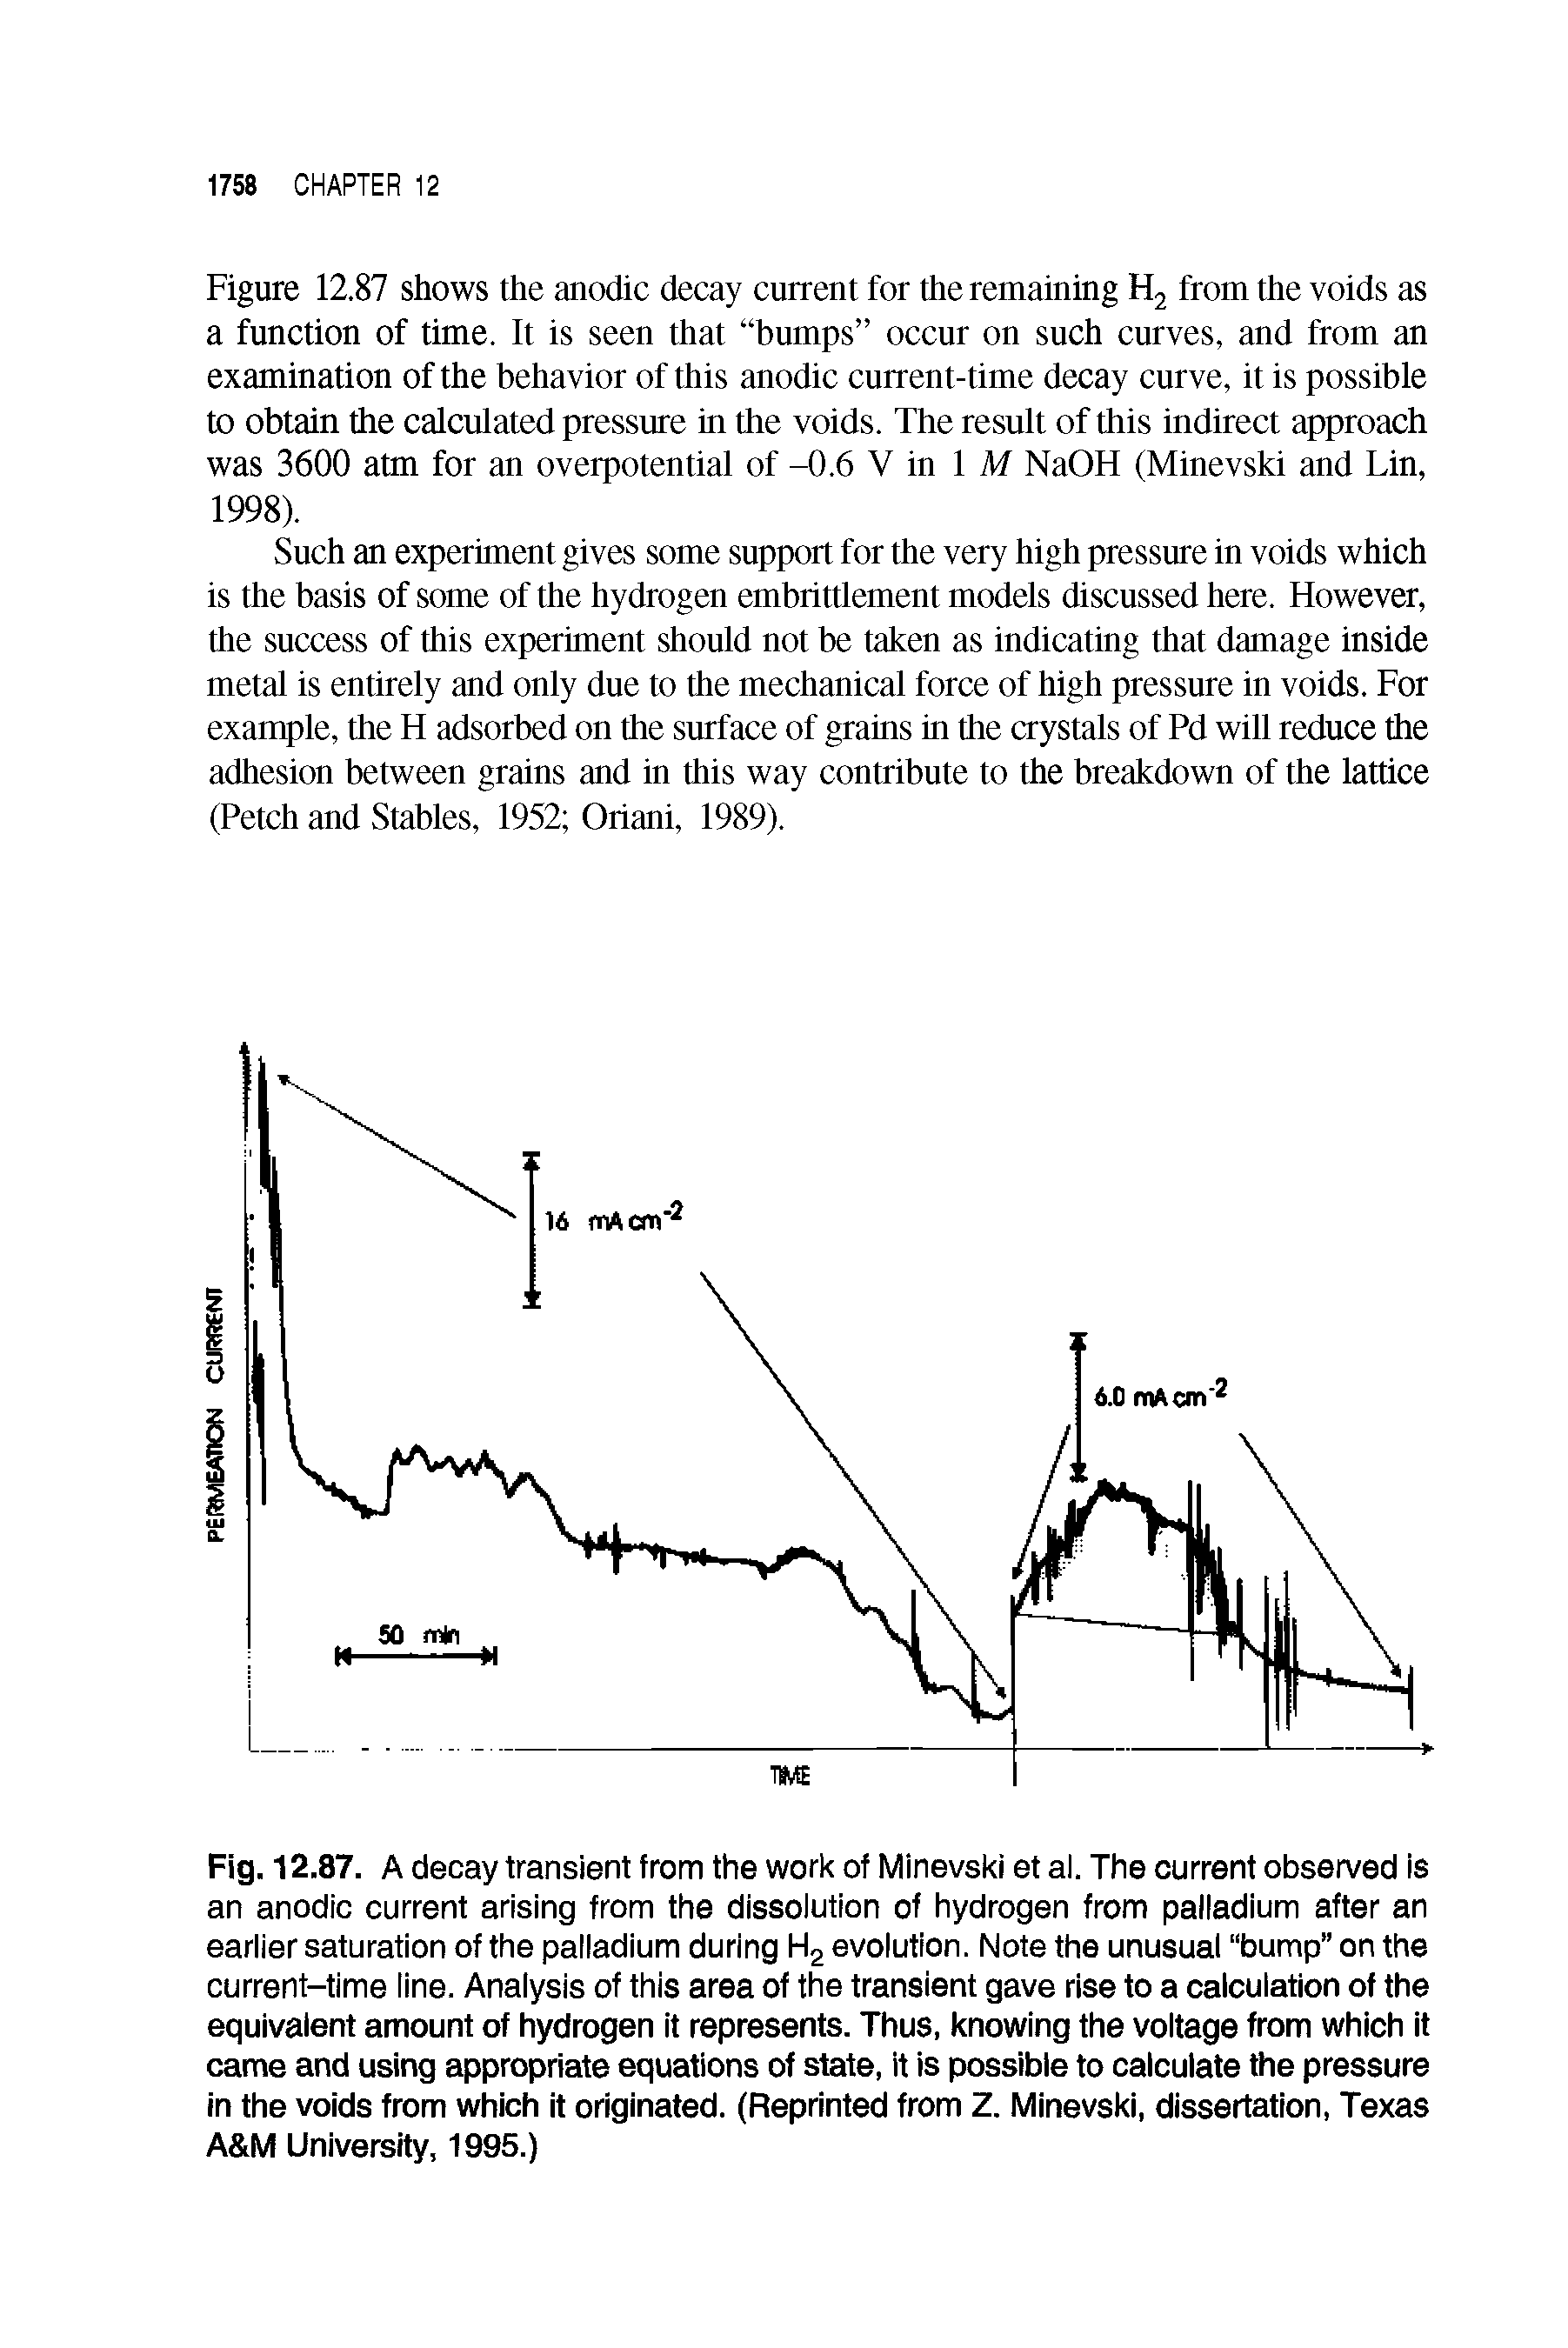 Fig. 12.87. A decay transient from the work of Minevski et al. The current observed is an anodic current arising from the dissolution of hydrogen from palladium after an earlier saturation of the palladium during H2 evolution. Note the unusual bump on the current-time line. Analysis of this area of the transient gave rise to a calculation of the equivalent amount of hydrogen it represents. Thus, knowing the voltage from which it came and using appropriate equations of state, it is possible to calculate the pressure in the voids from which it originated. (Reprinted from Z. Minevski, dissertation, Texas A M University, 1995.)...